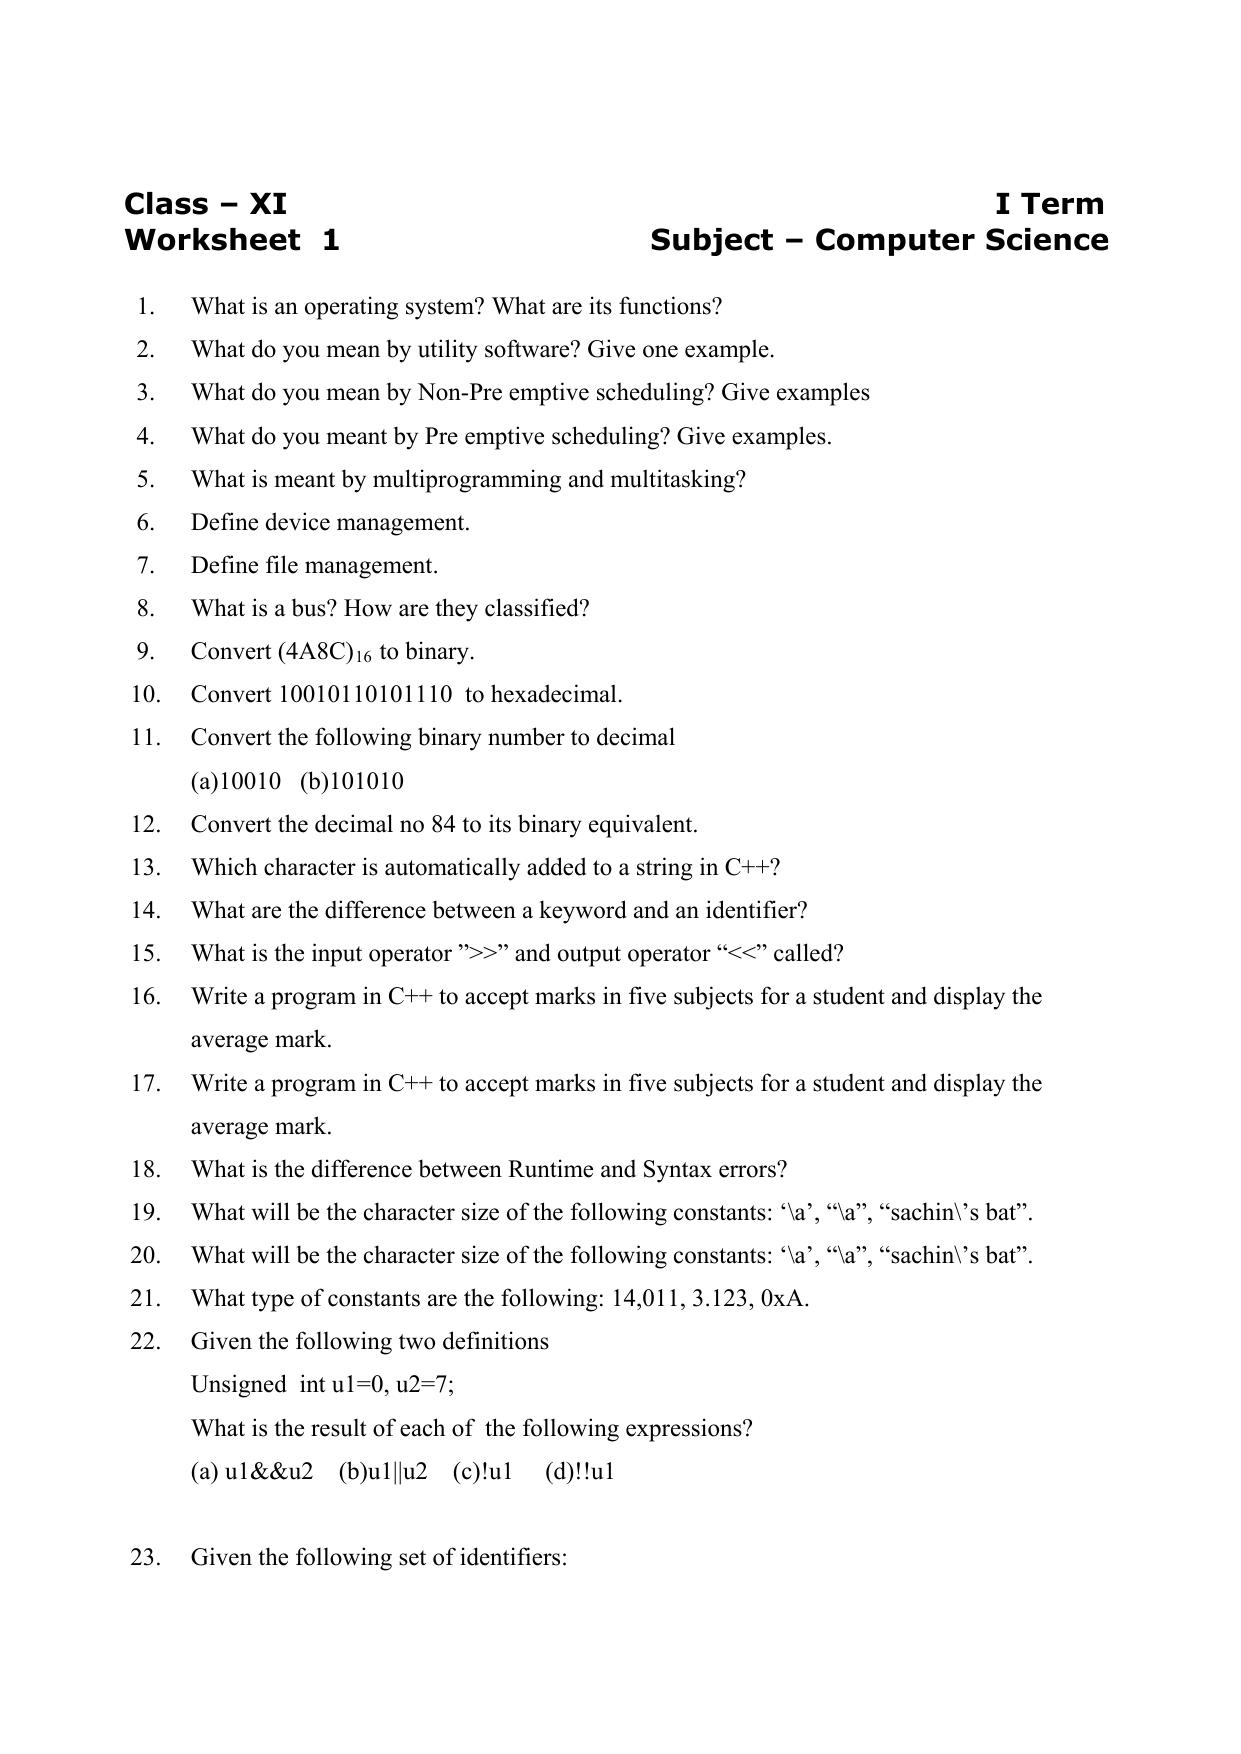 CBSE Worksheets for Class 11 Computer Science Assignment 1 - Page 1